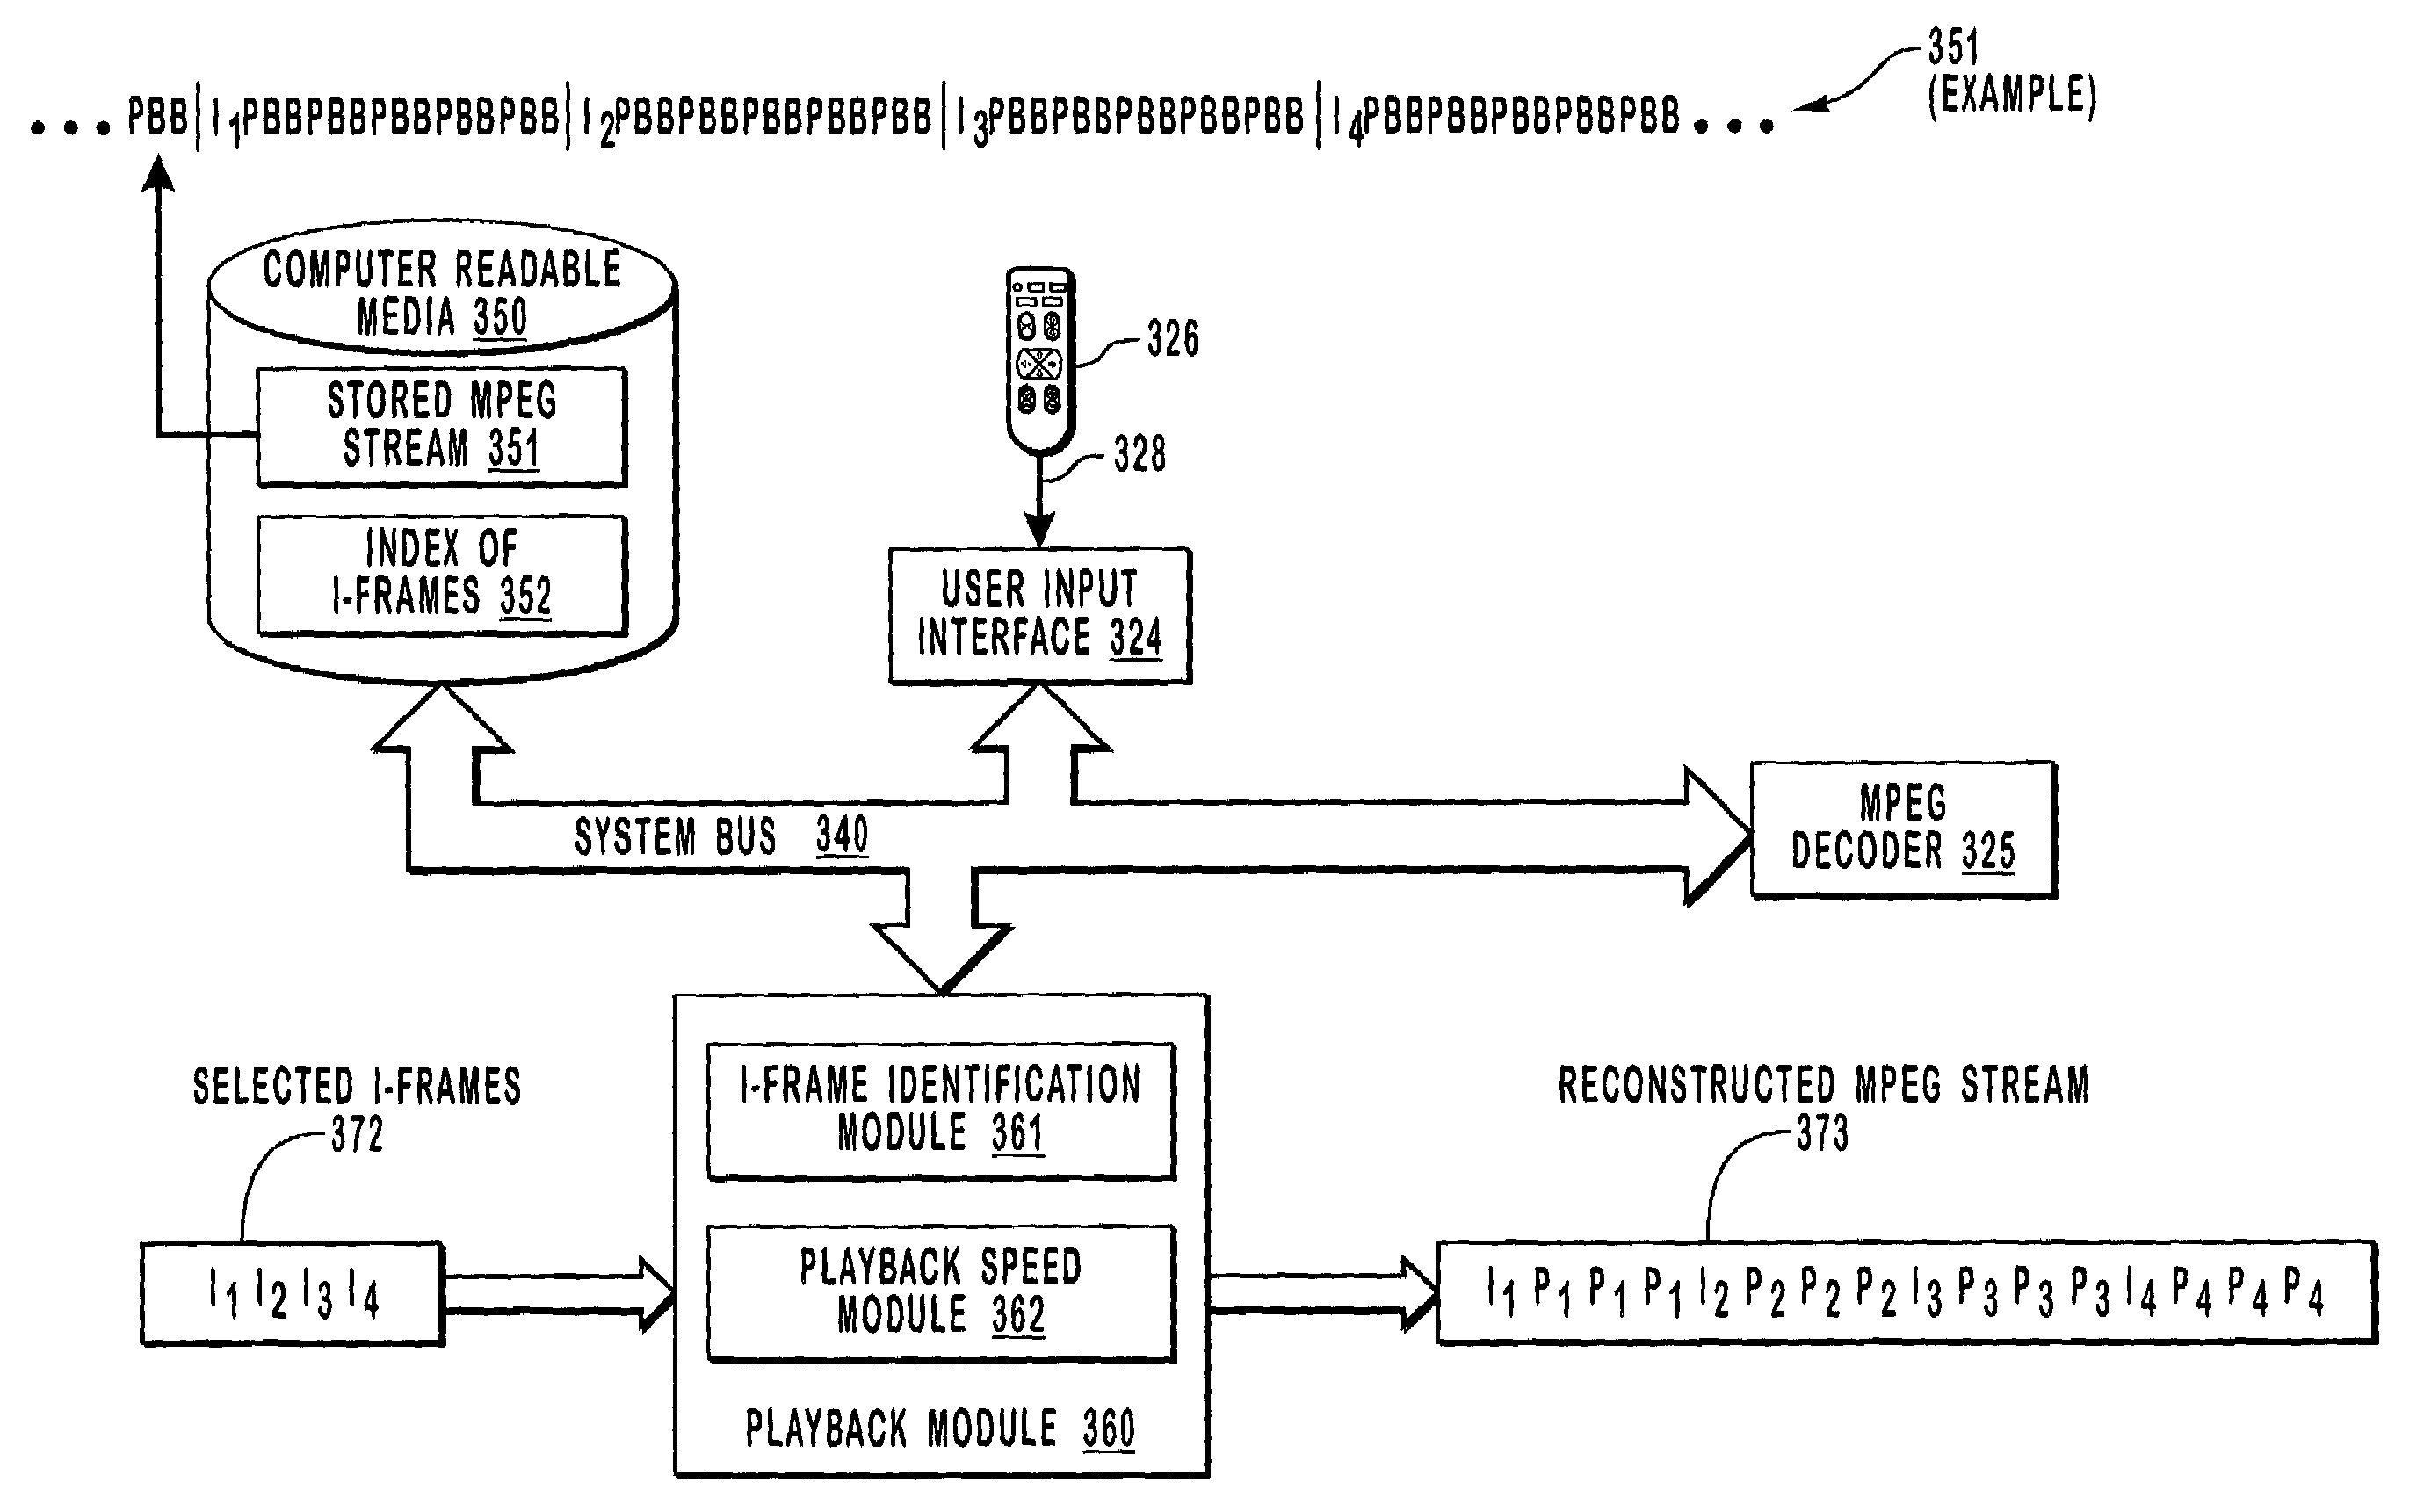 Systems and methods for playing digital video in reverse and fast forward modes